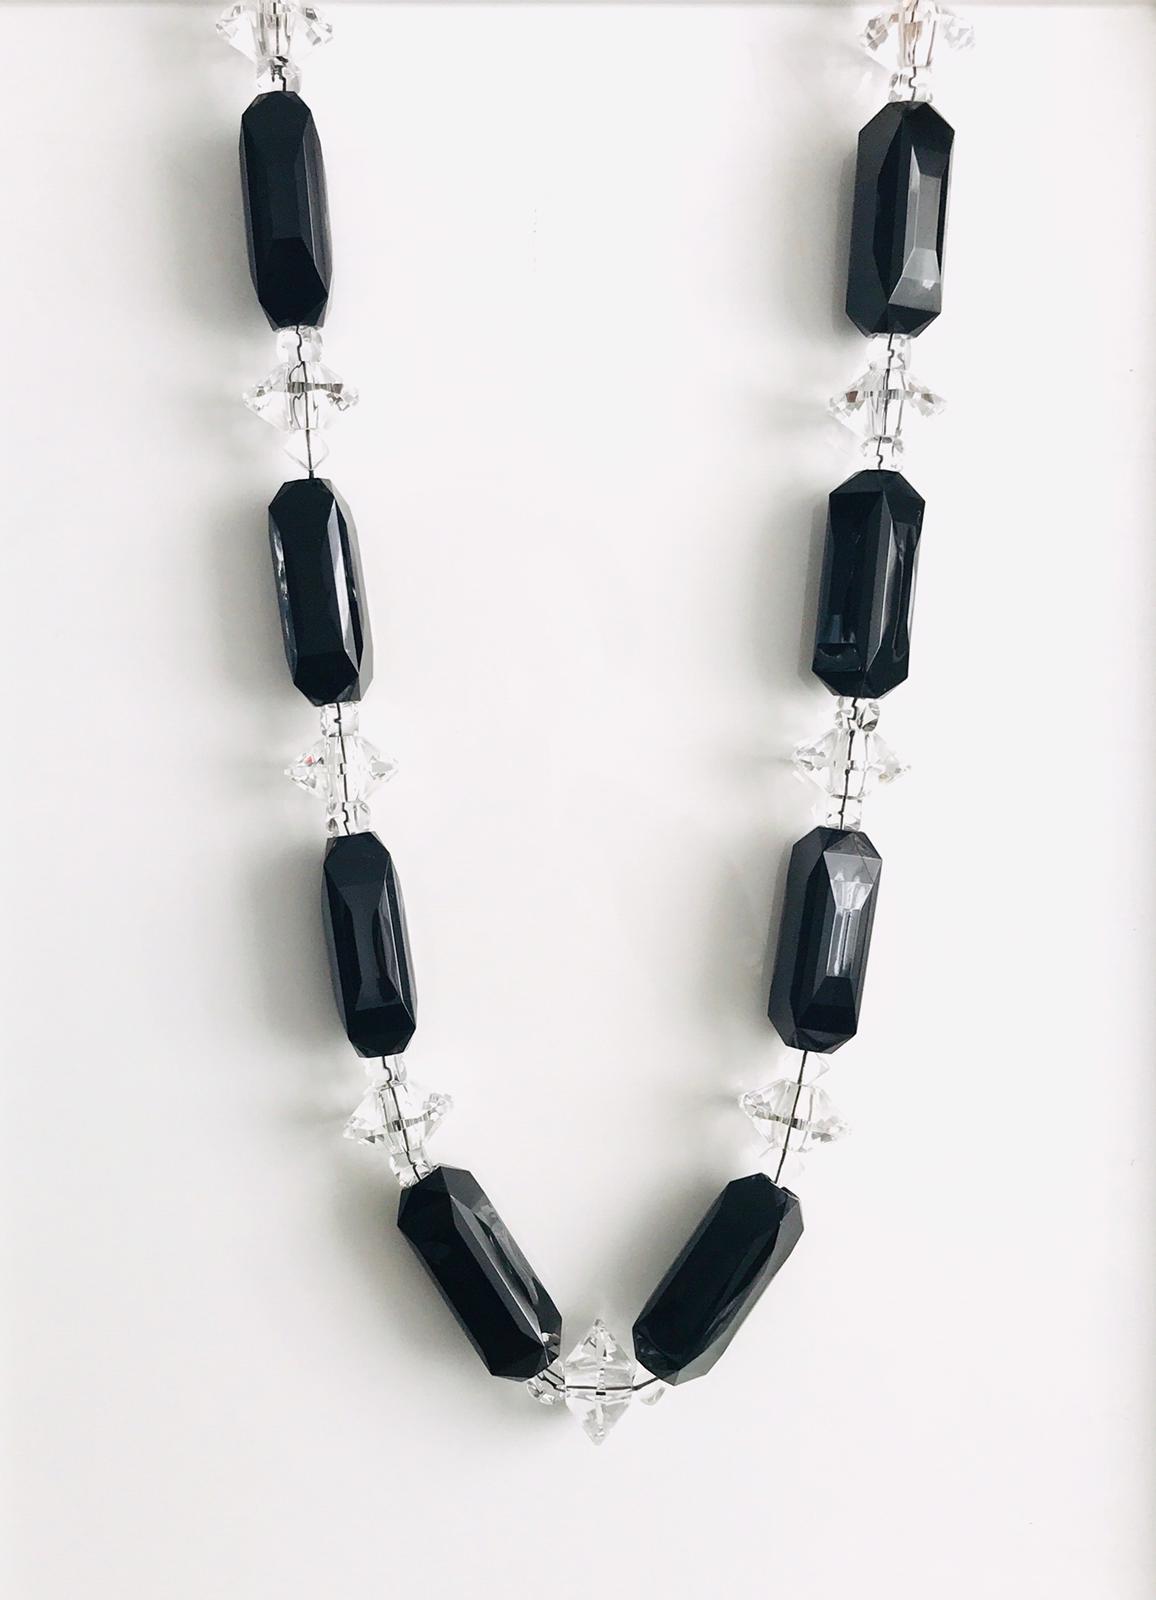 Vintage Black and Clear Beads Necklace